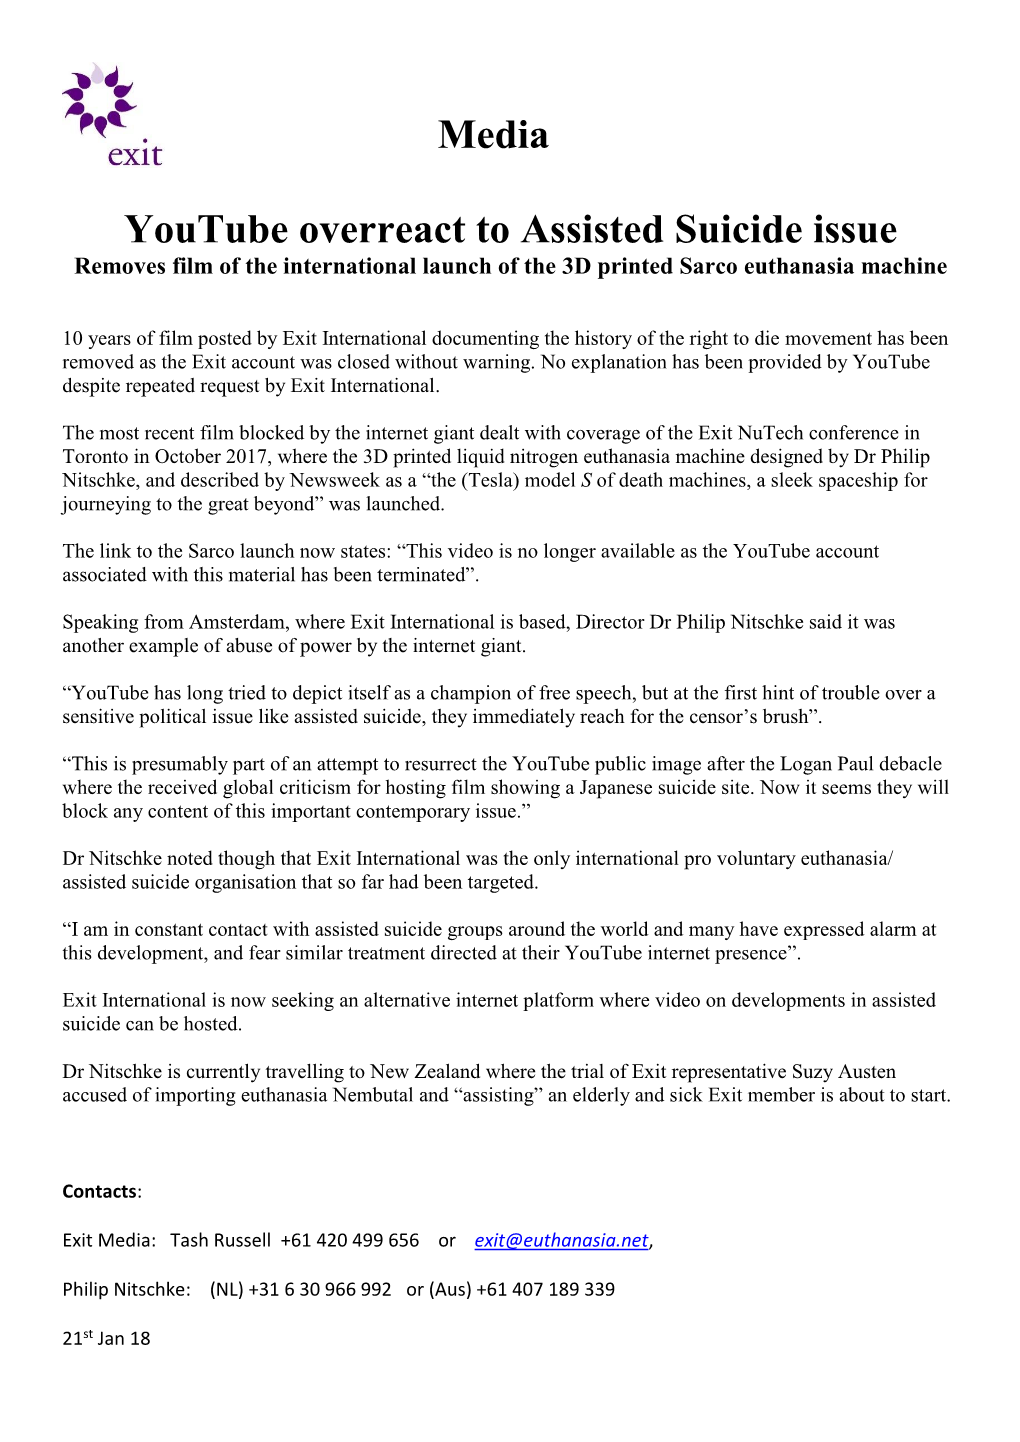 Media Youtube Overreact to Assisted Suicide Issue